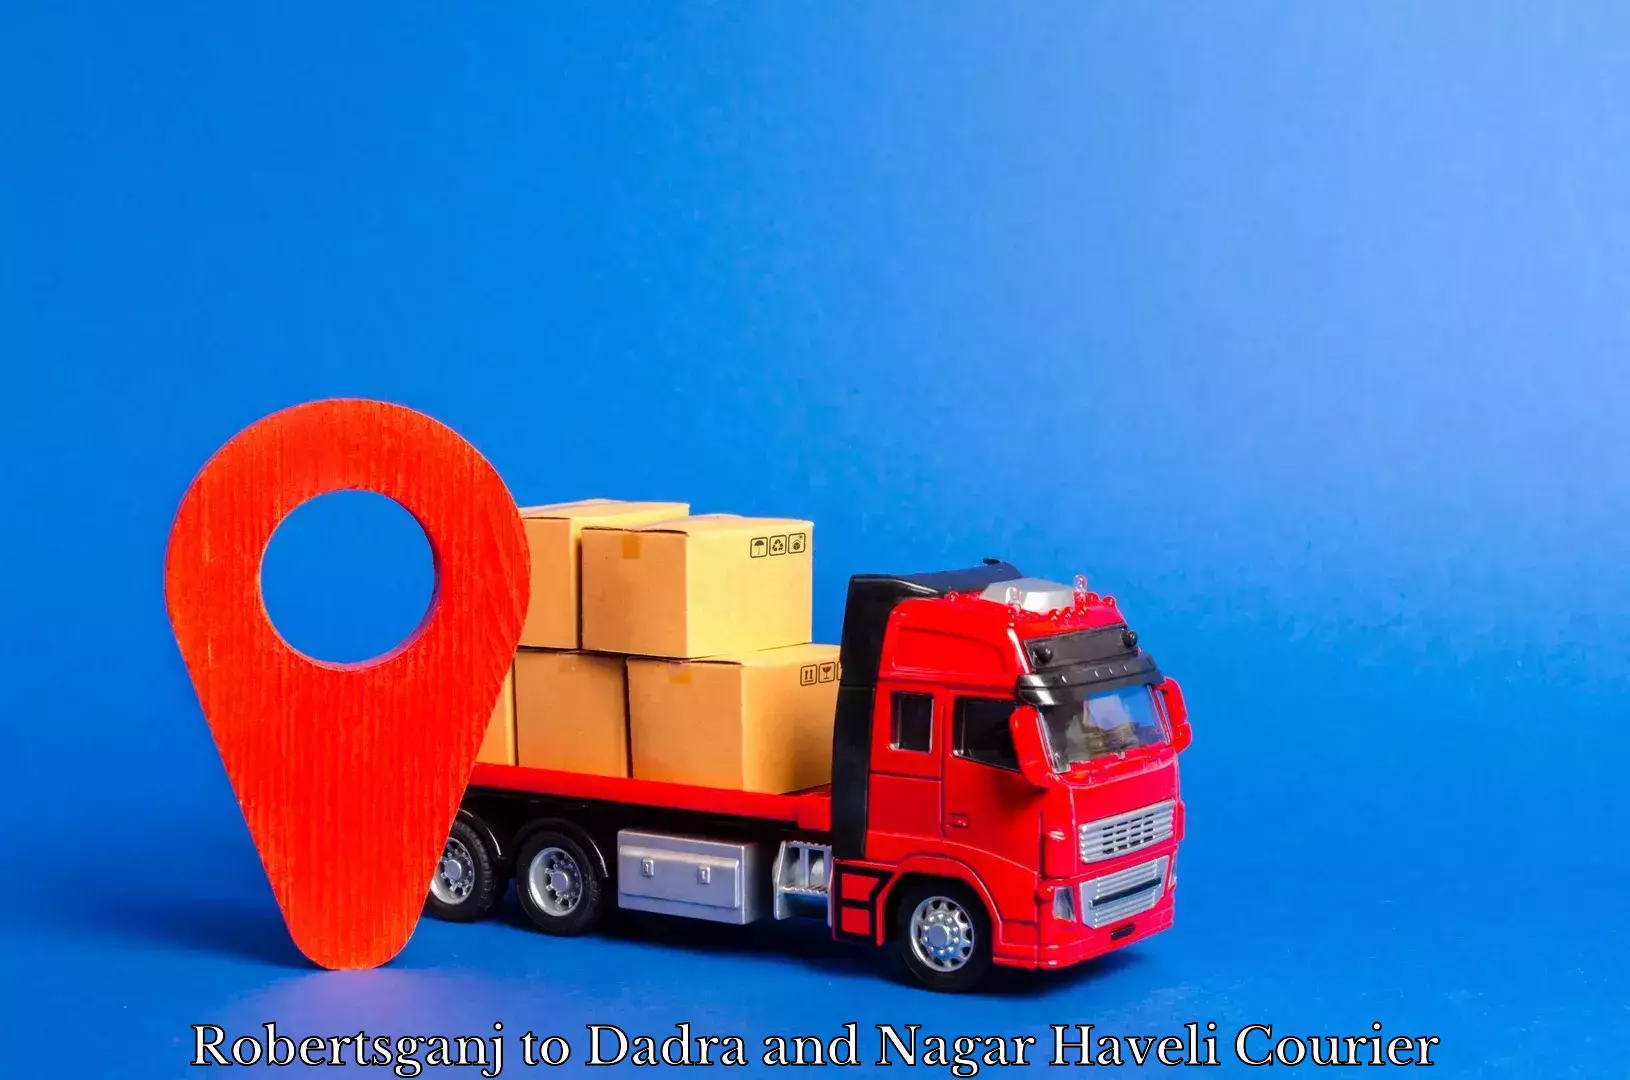 Next-day delivery options in Robertsganj to Dadra and Nagar Haveli